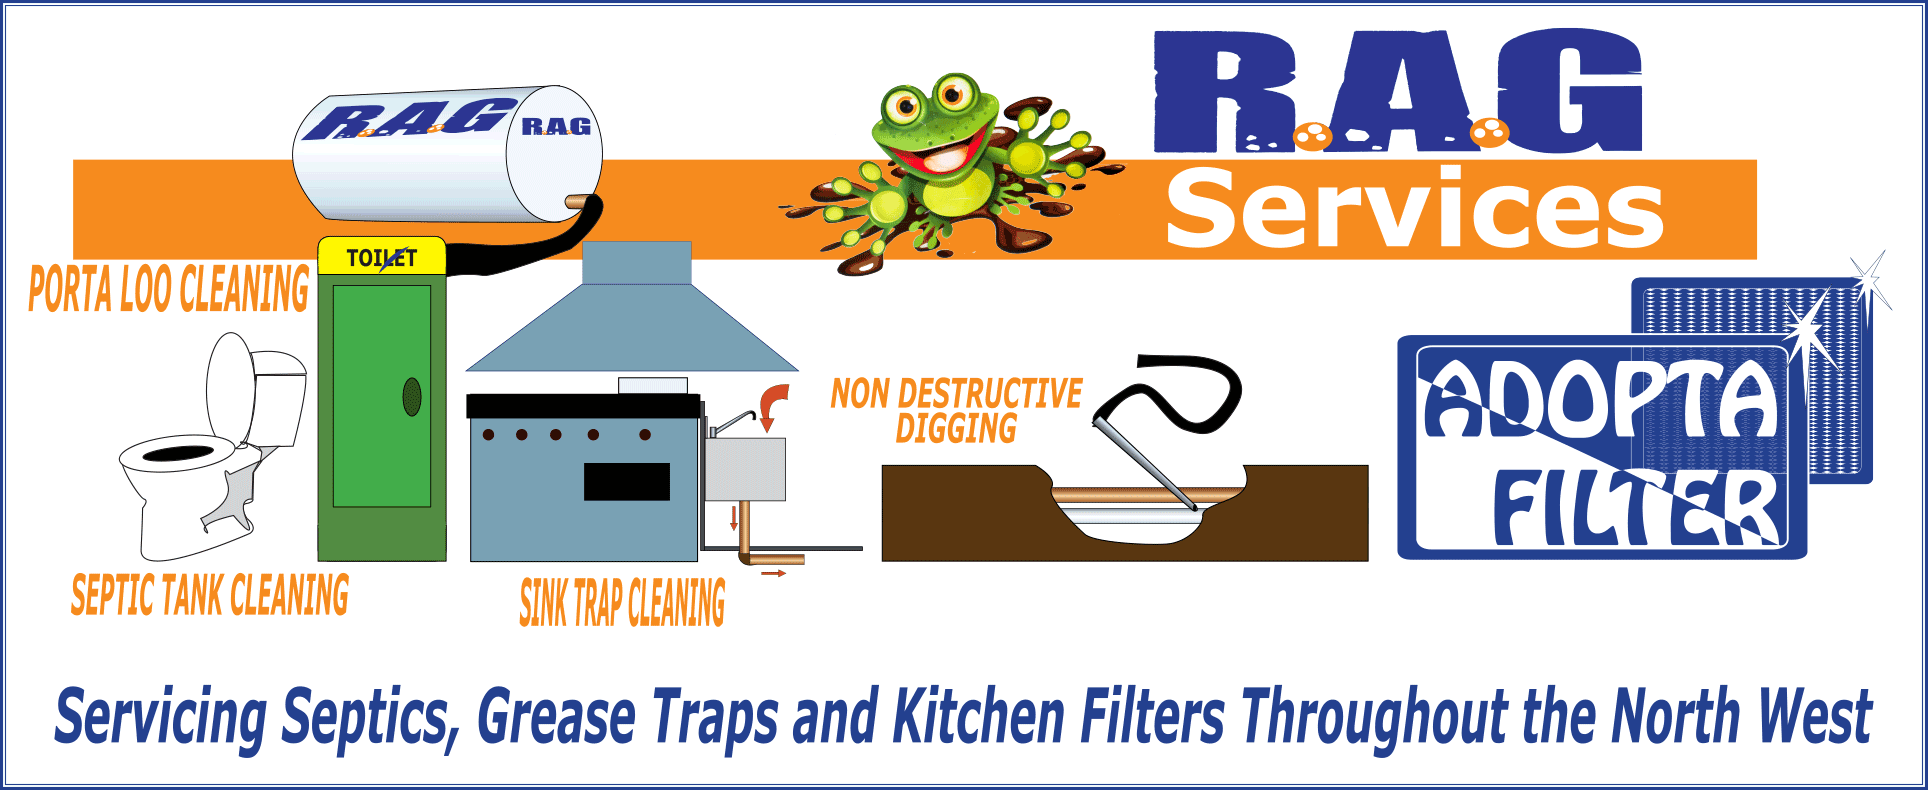 All Rags Services